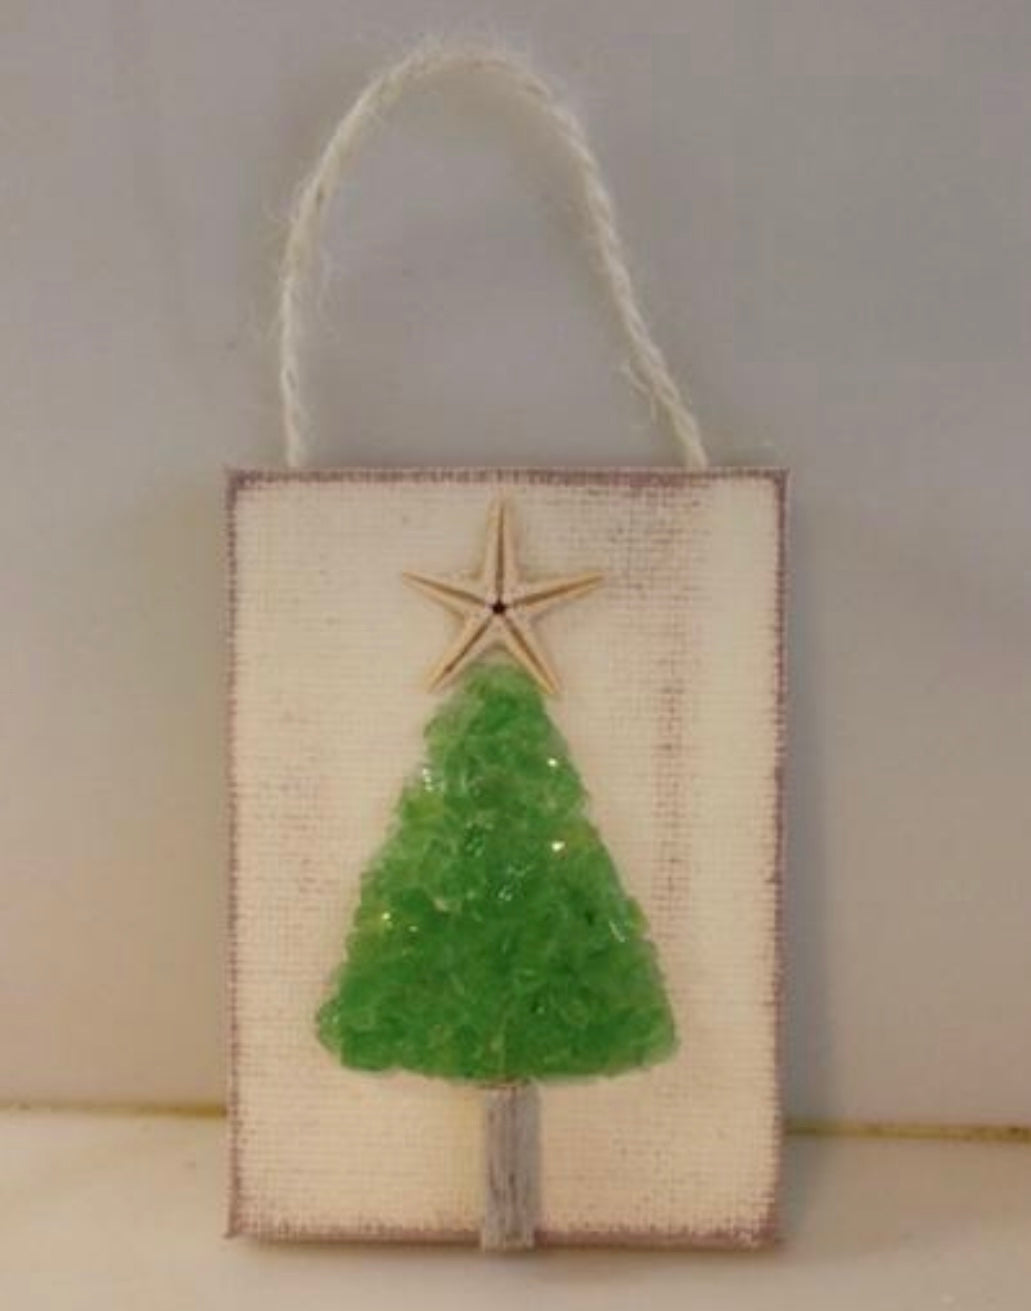 Christmas tree ornament green crushed glass